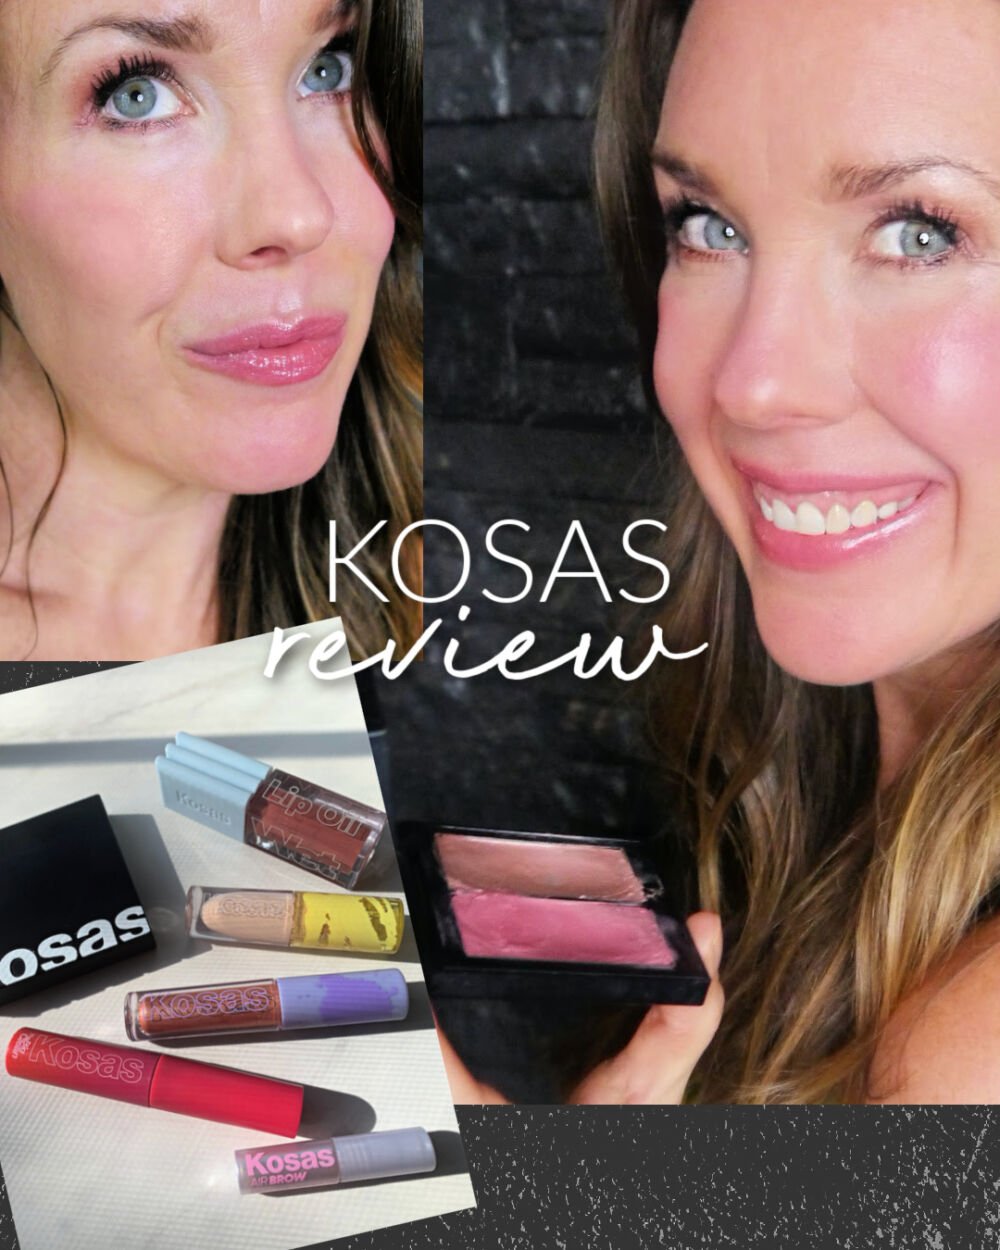 Kosas Review-The Best Kosas Products You'll Want to Try